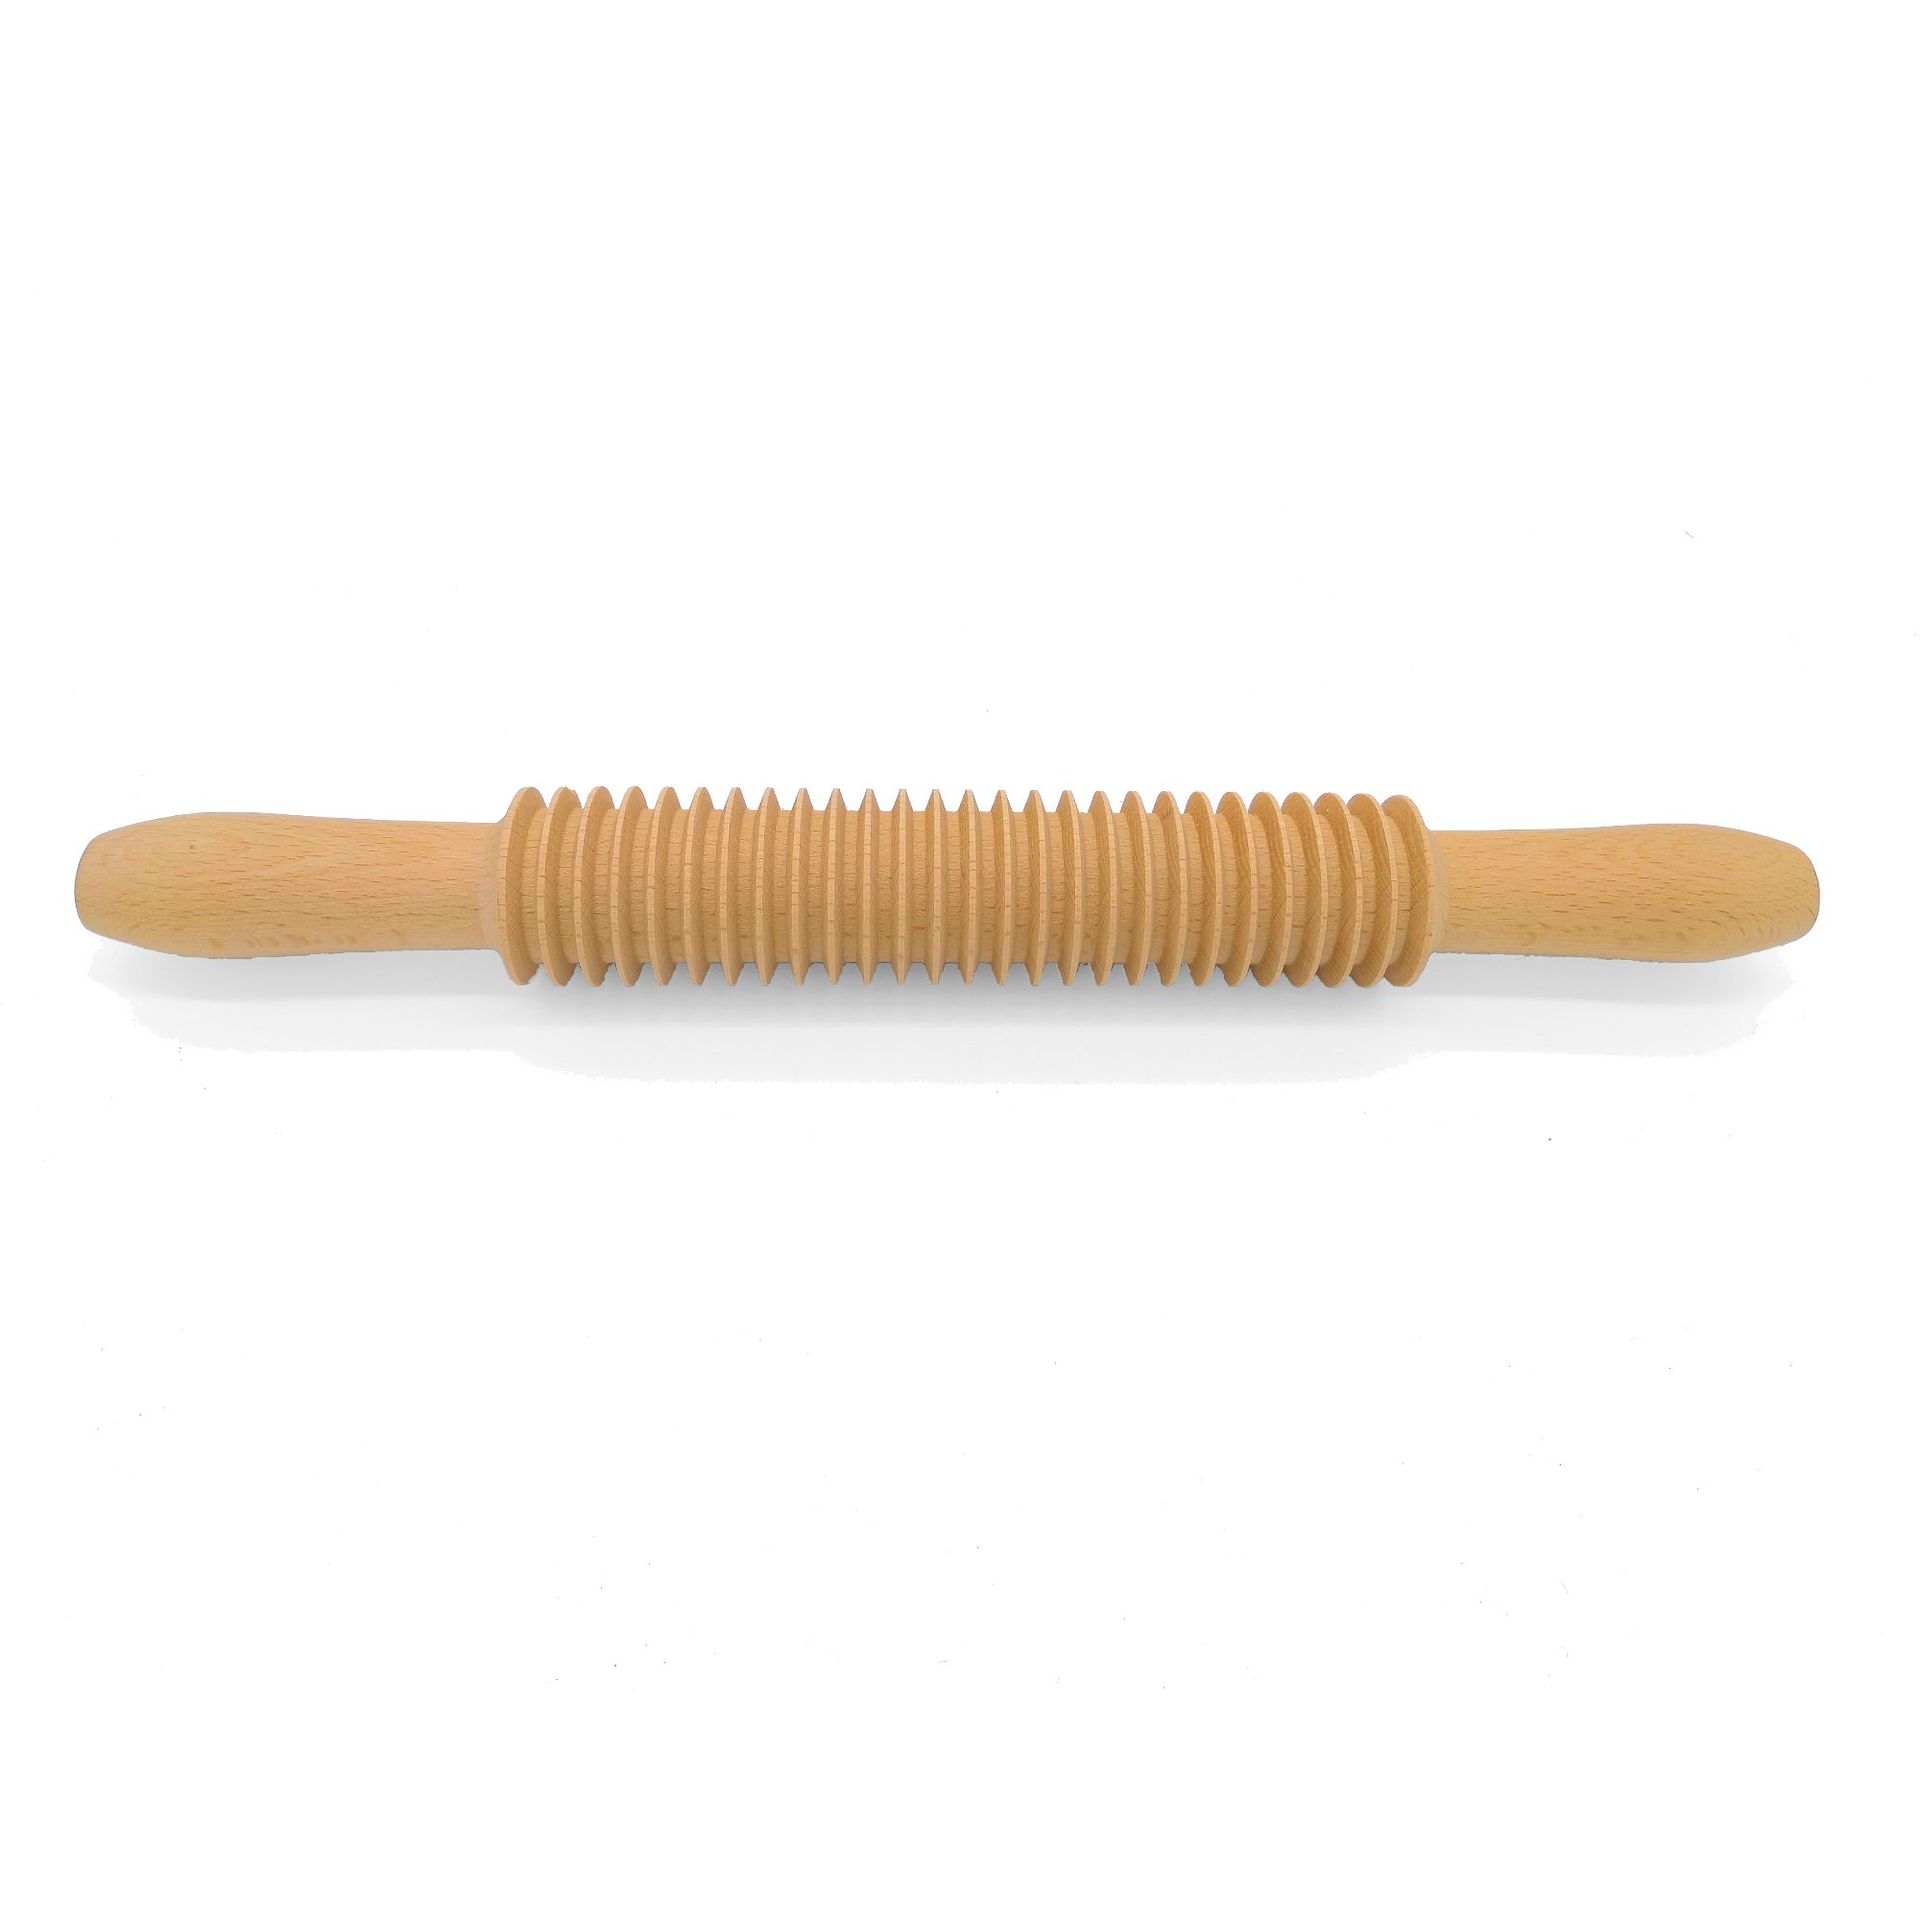 Wooden screw thread long thin spaghetti beech wood rolling pin for baking dough pasta noodles